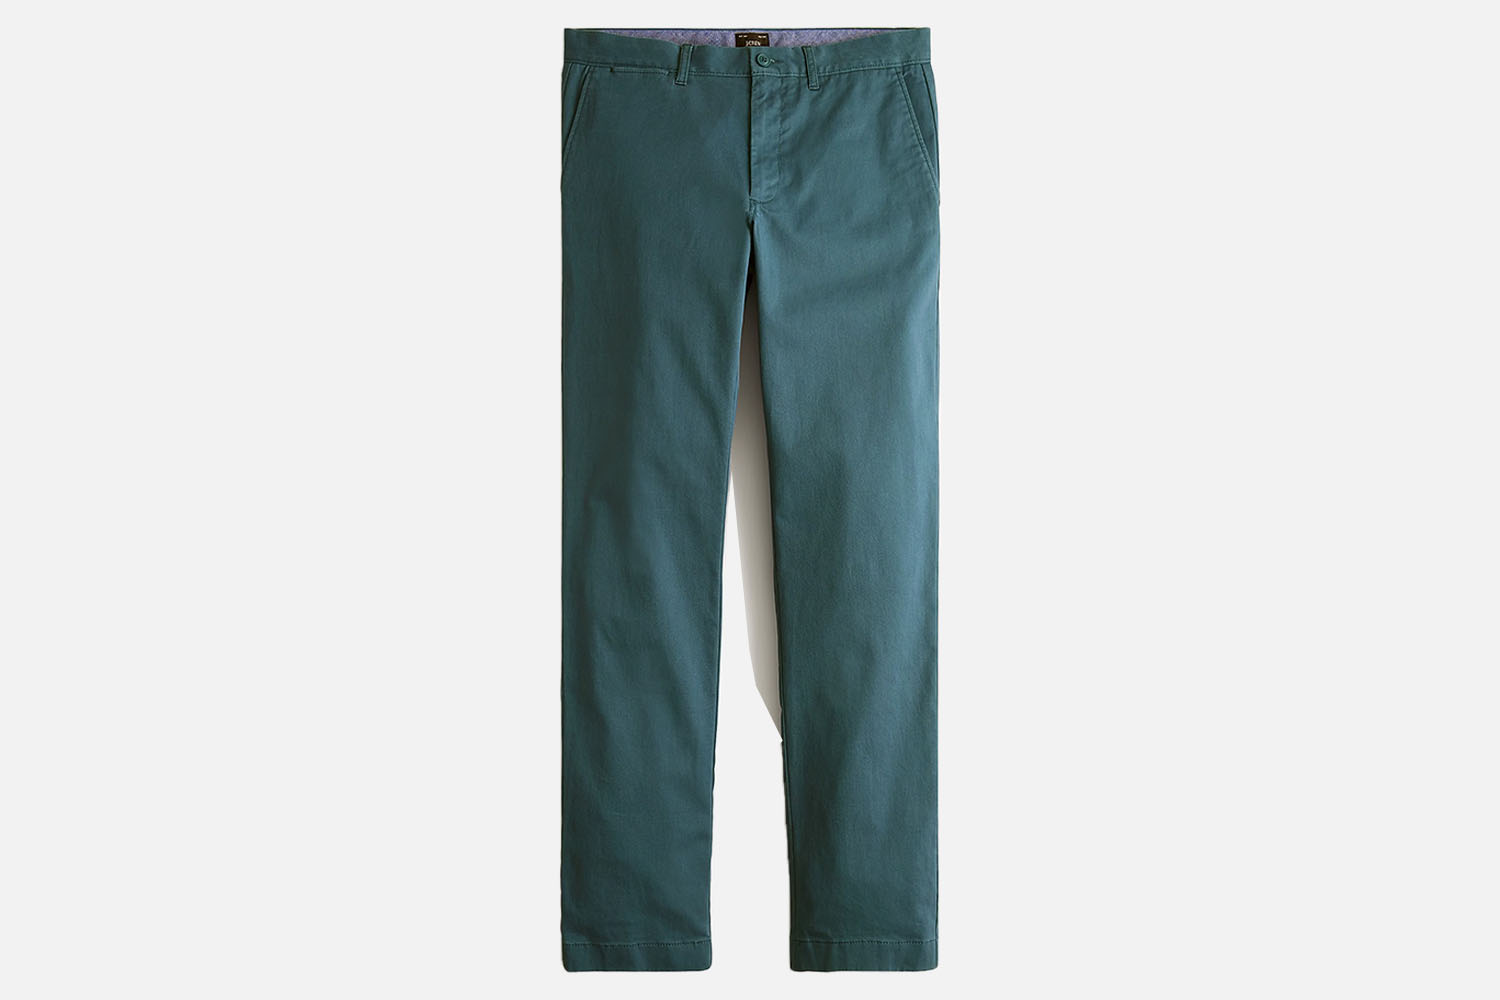 J.Crew 770 Straight-Fit Stretch Chino Pant